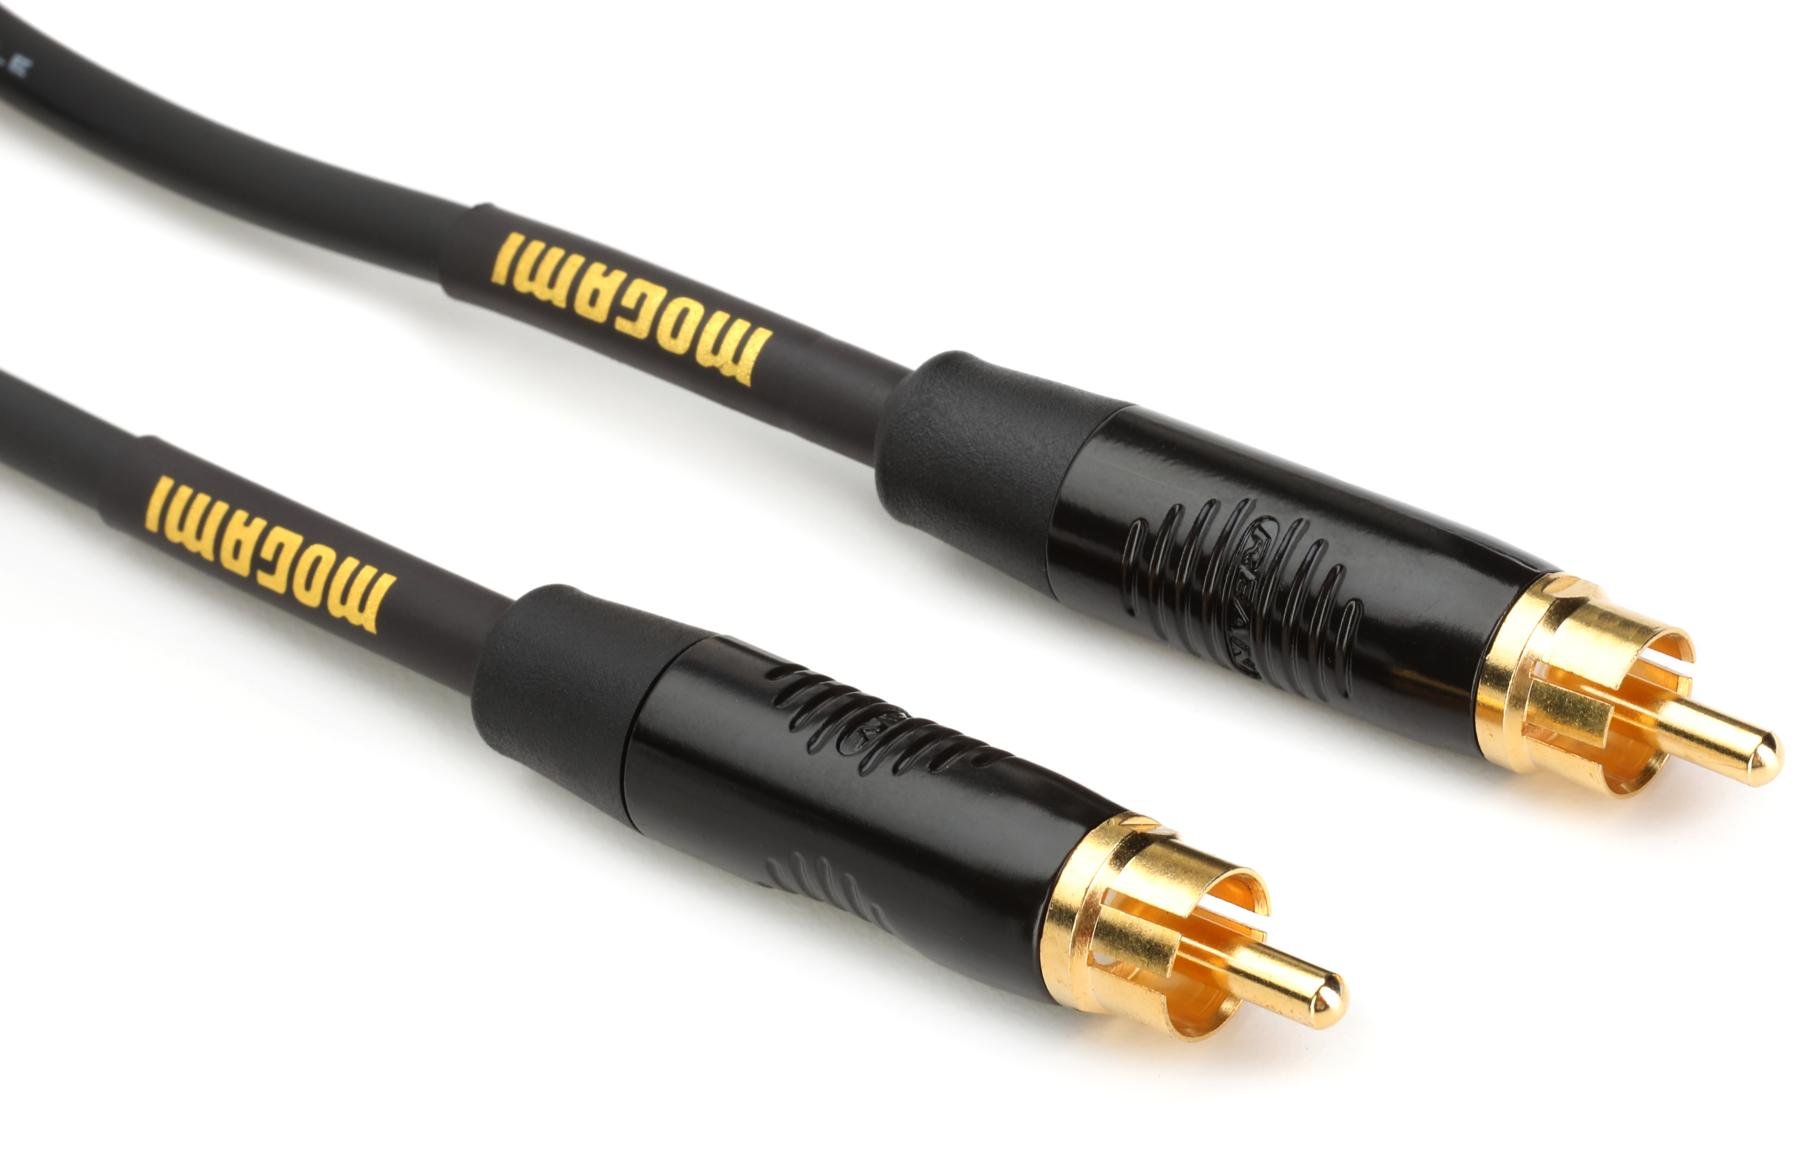 Cable Matters Unbalanced XLR to RCA Cable/Female XLR to Male RCA Audio Cable 6 Feet